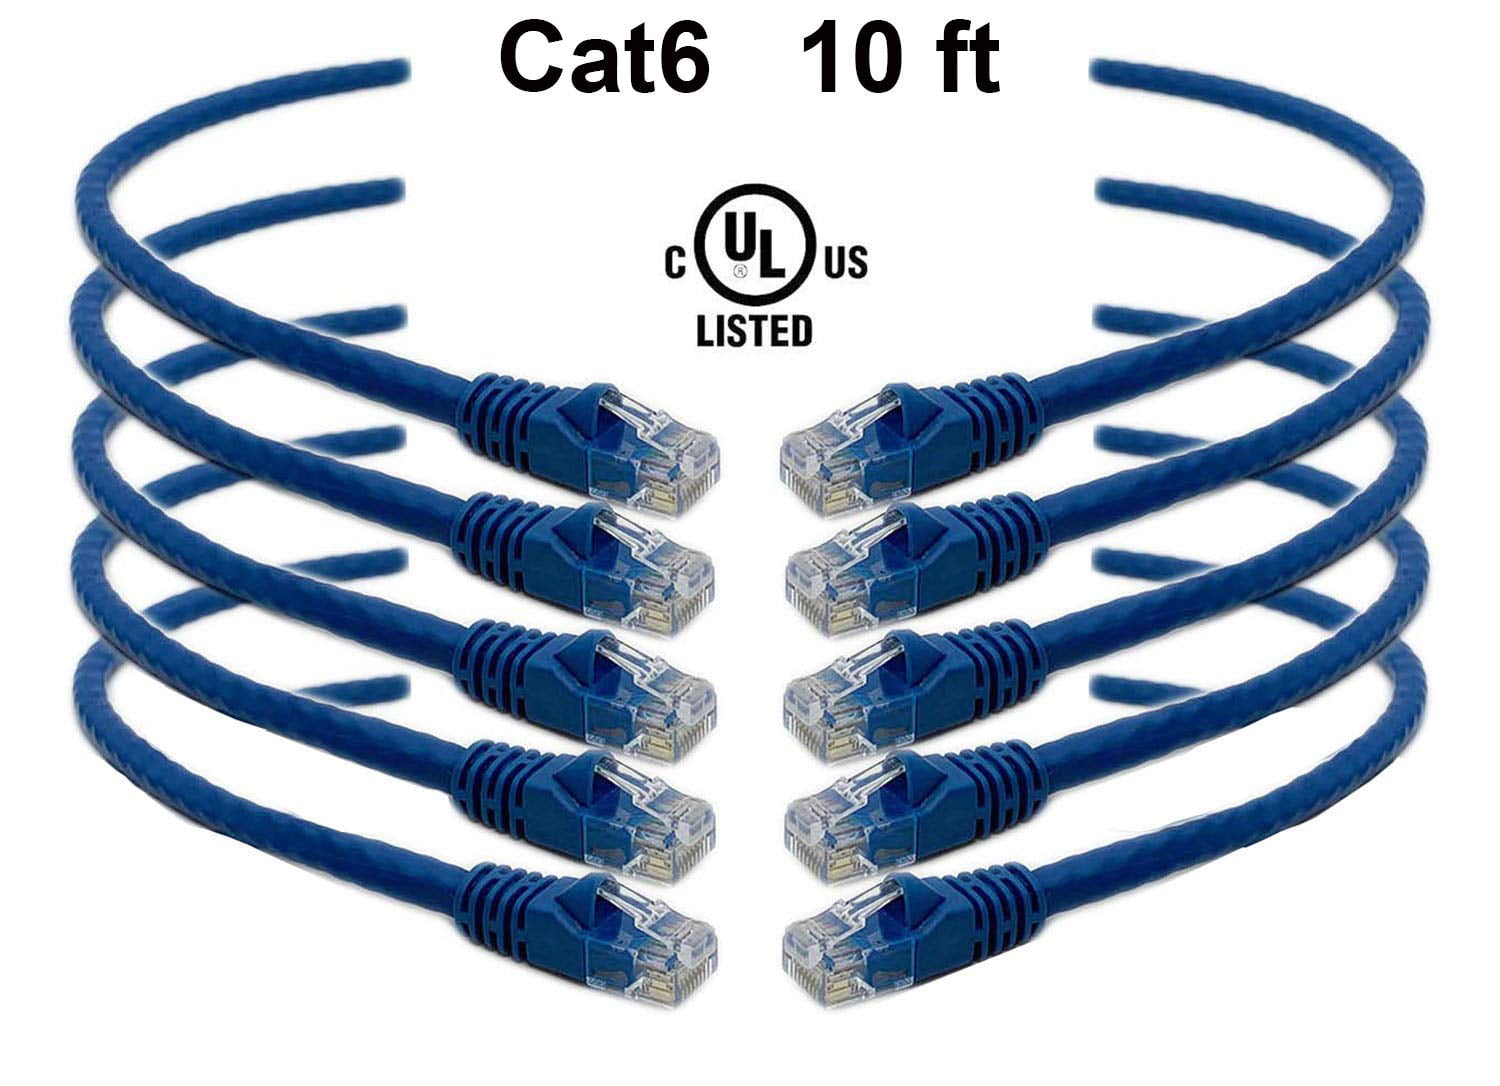 iMBAPrice 10 Feet Cat6 Cable Pack of 5 Premium Grade RJ45 Ethernet Snagless Patch Cord Red 